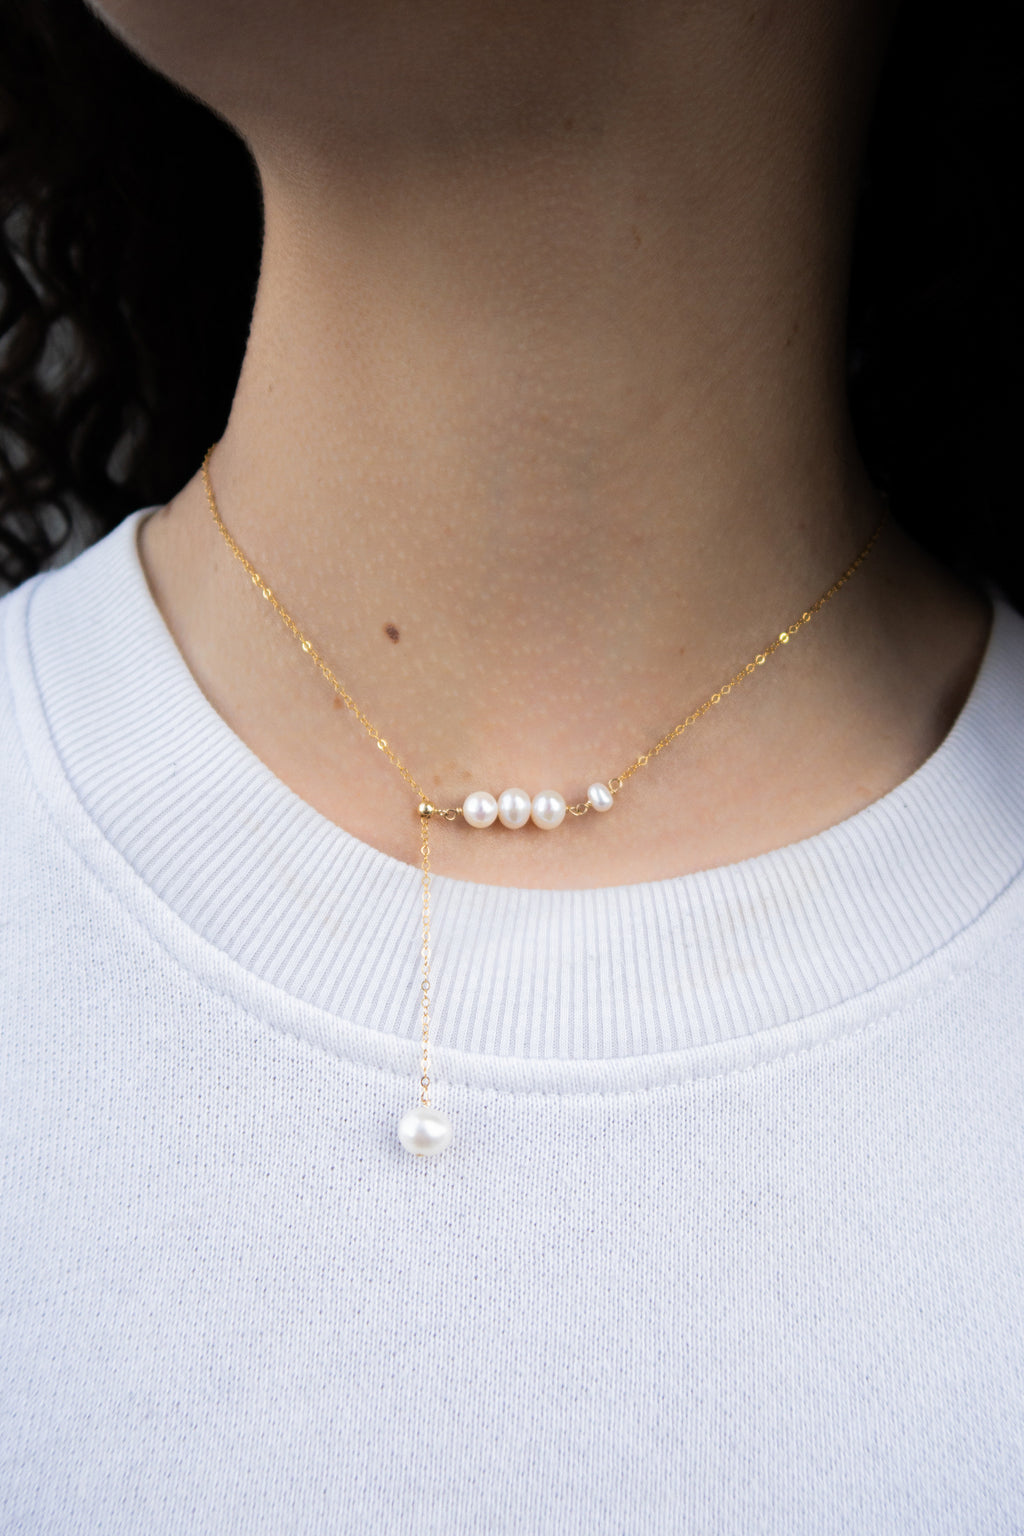 Hailey — Pearl pendant necklace